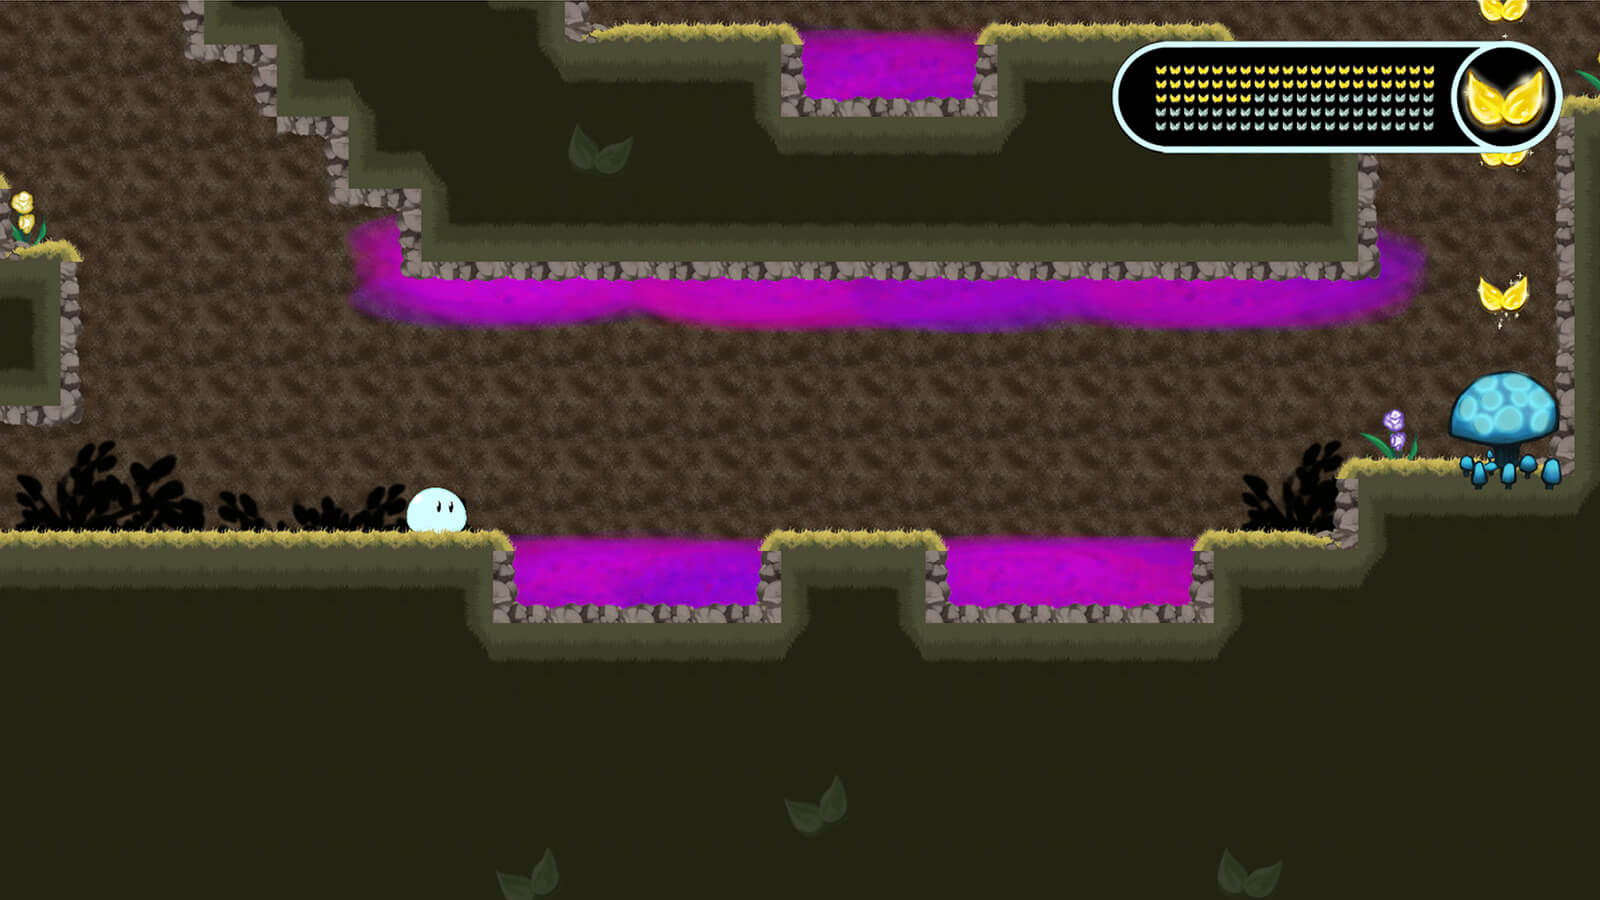 A round slime character in an underground tunnel, faced with pits of deadly pink goop on the floor and ceiling.